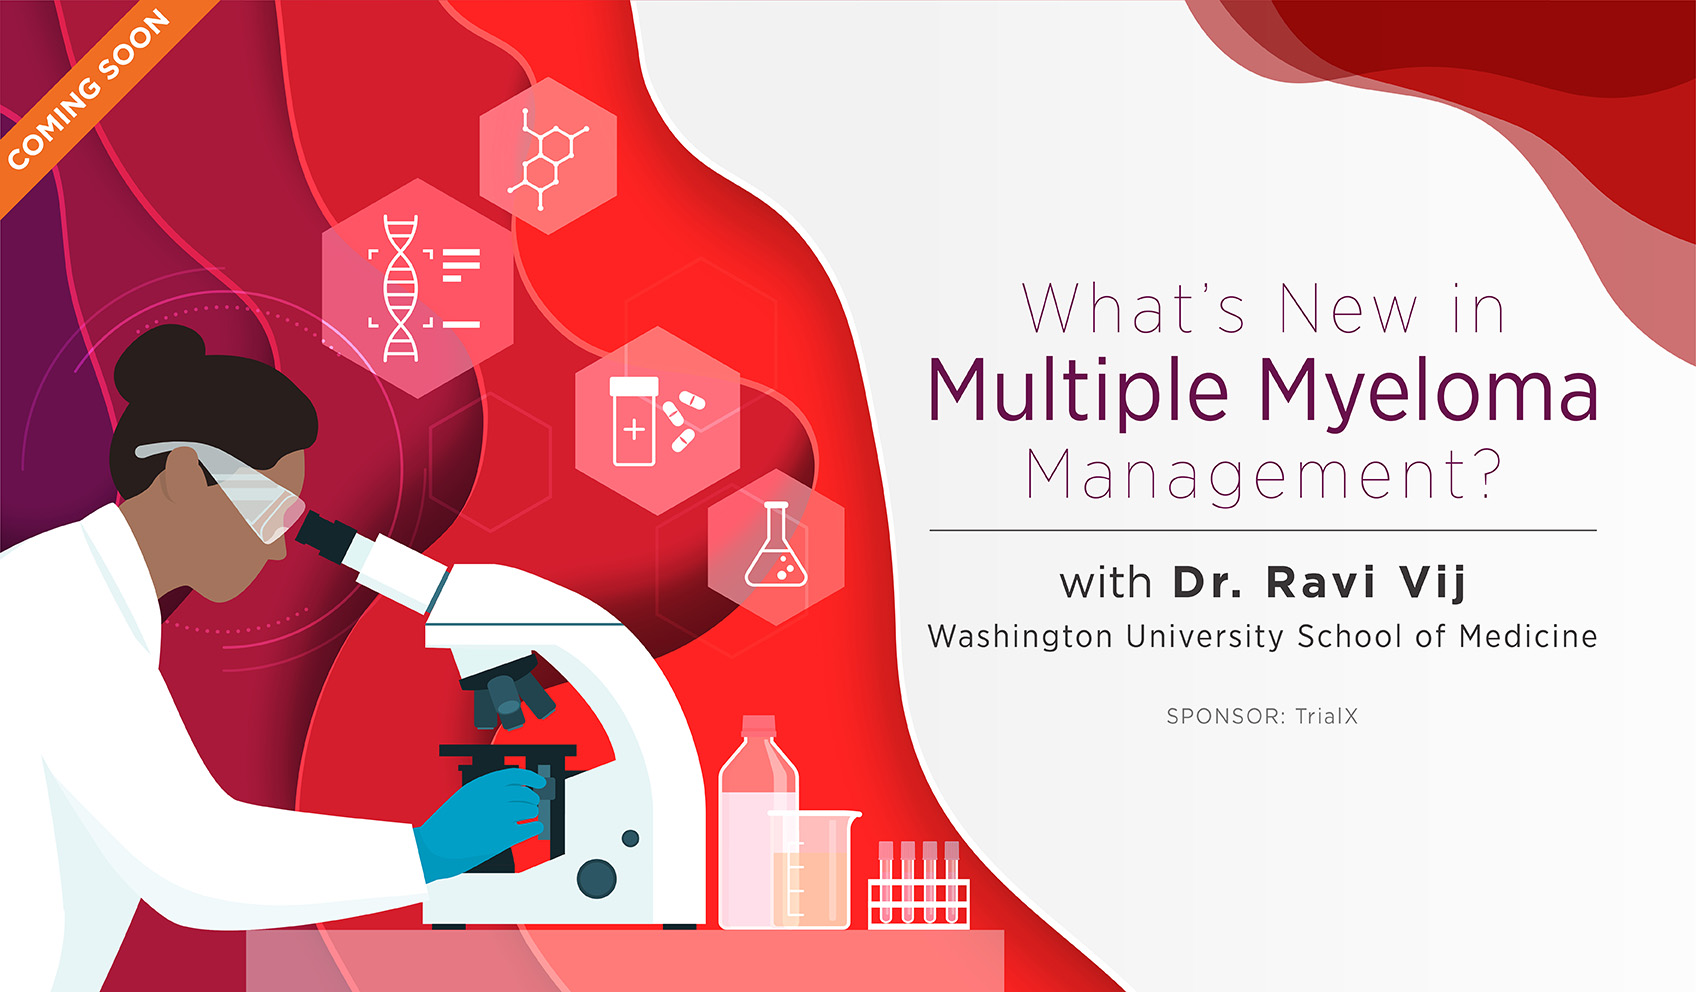 What’s New in Multiple Myeloma Management?